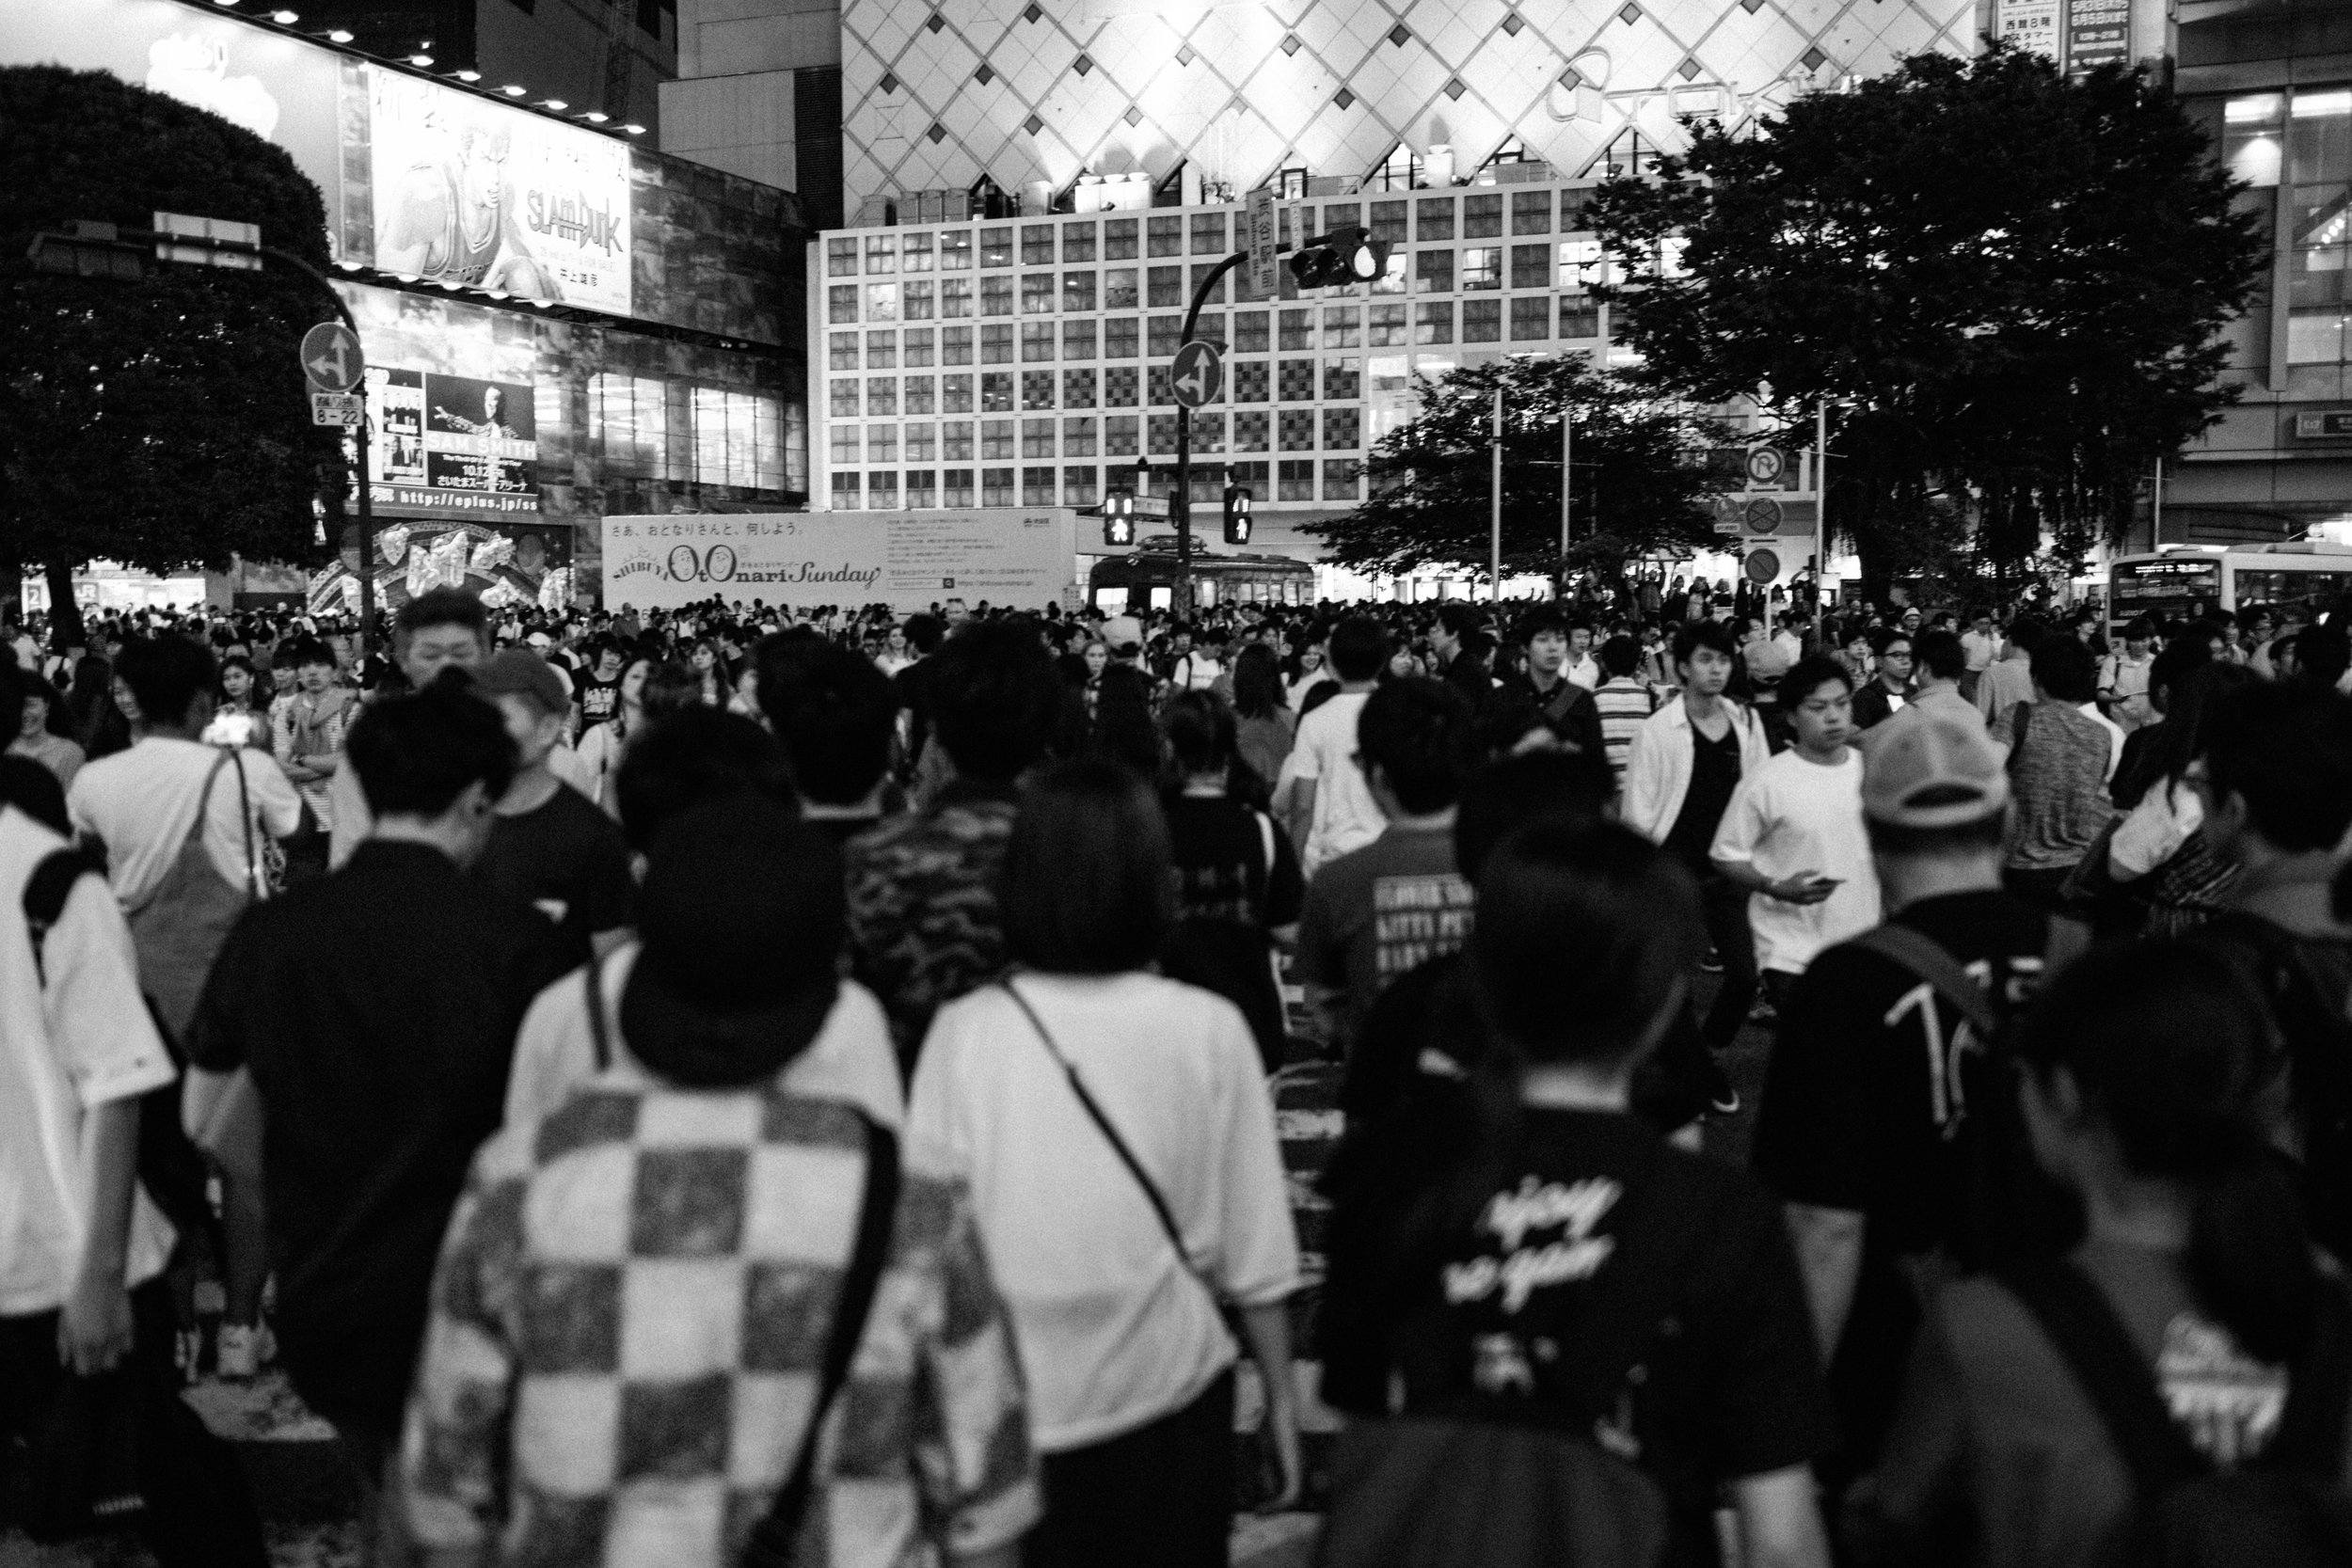  After a 12 hour flight, we were initiated into Tokyo by arriving at Shibuya crossing where it’s rumored that at the busiest of times, over 1000 people cross the intersection at a time.   